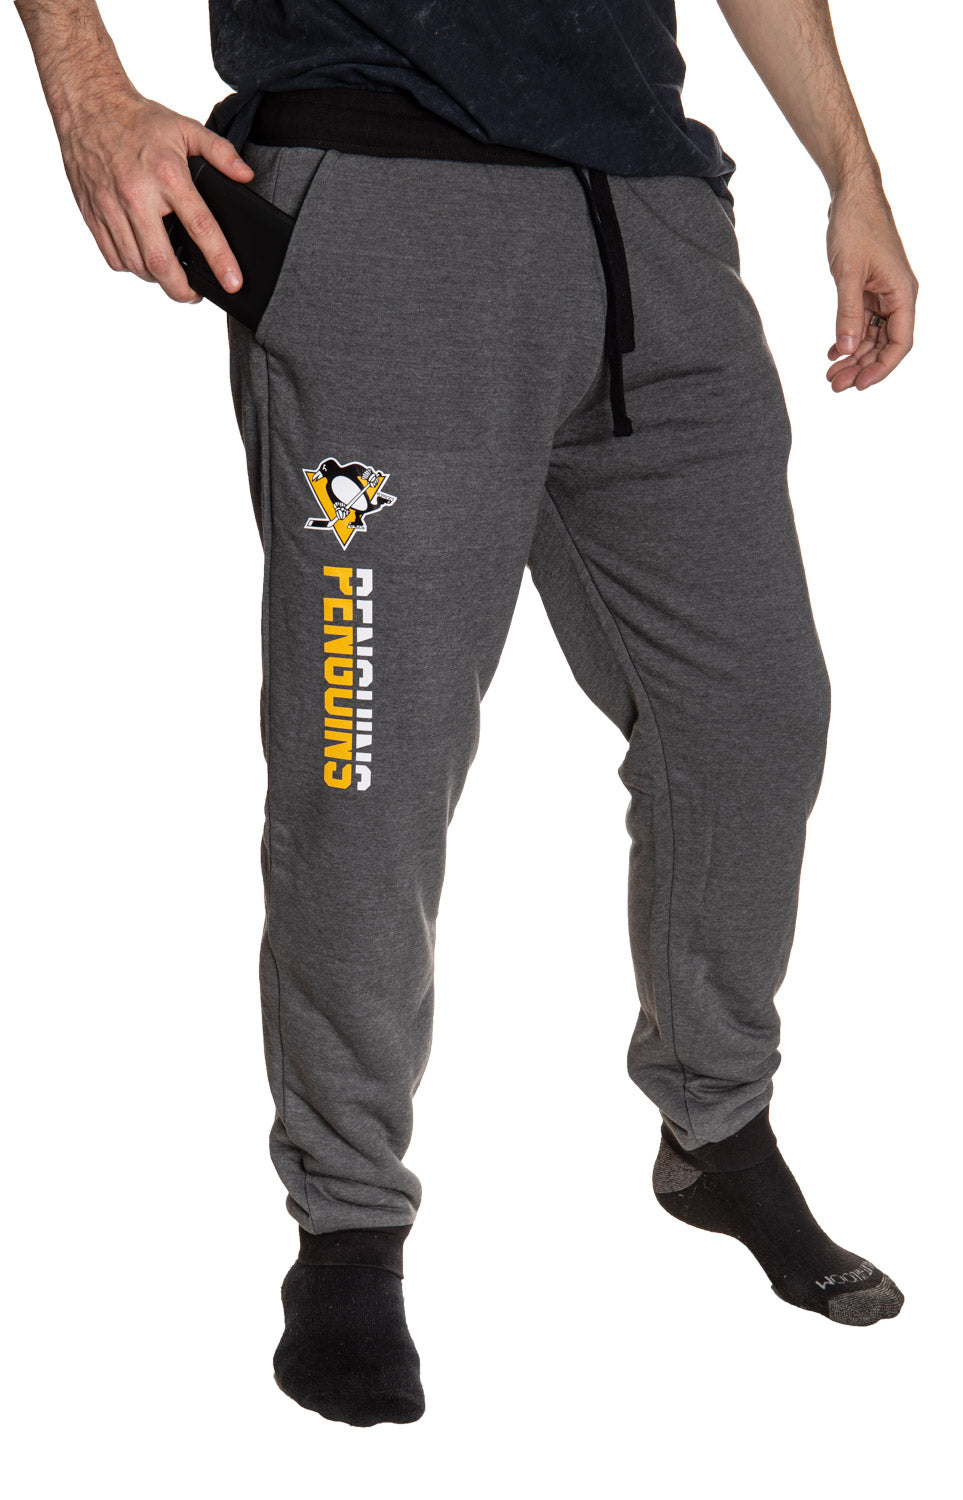 Pittsburgh Penguins NHL Unisex Sherpa Lined Warm Sweatpants with Pockets